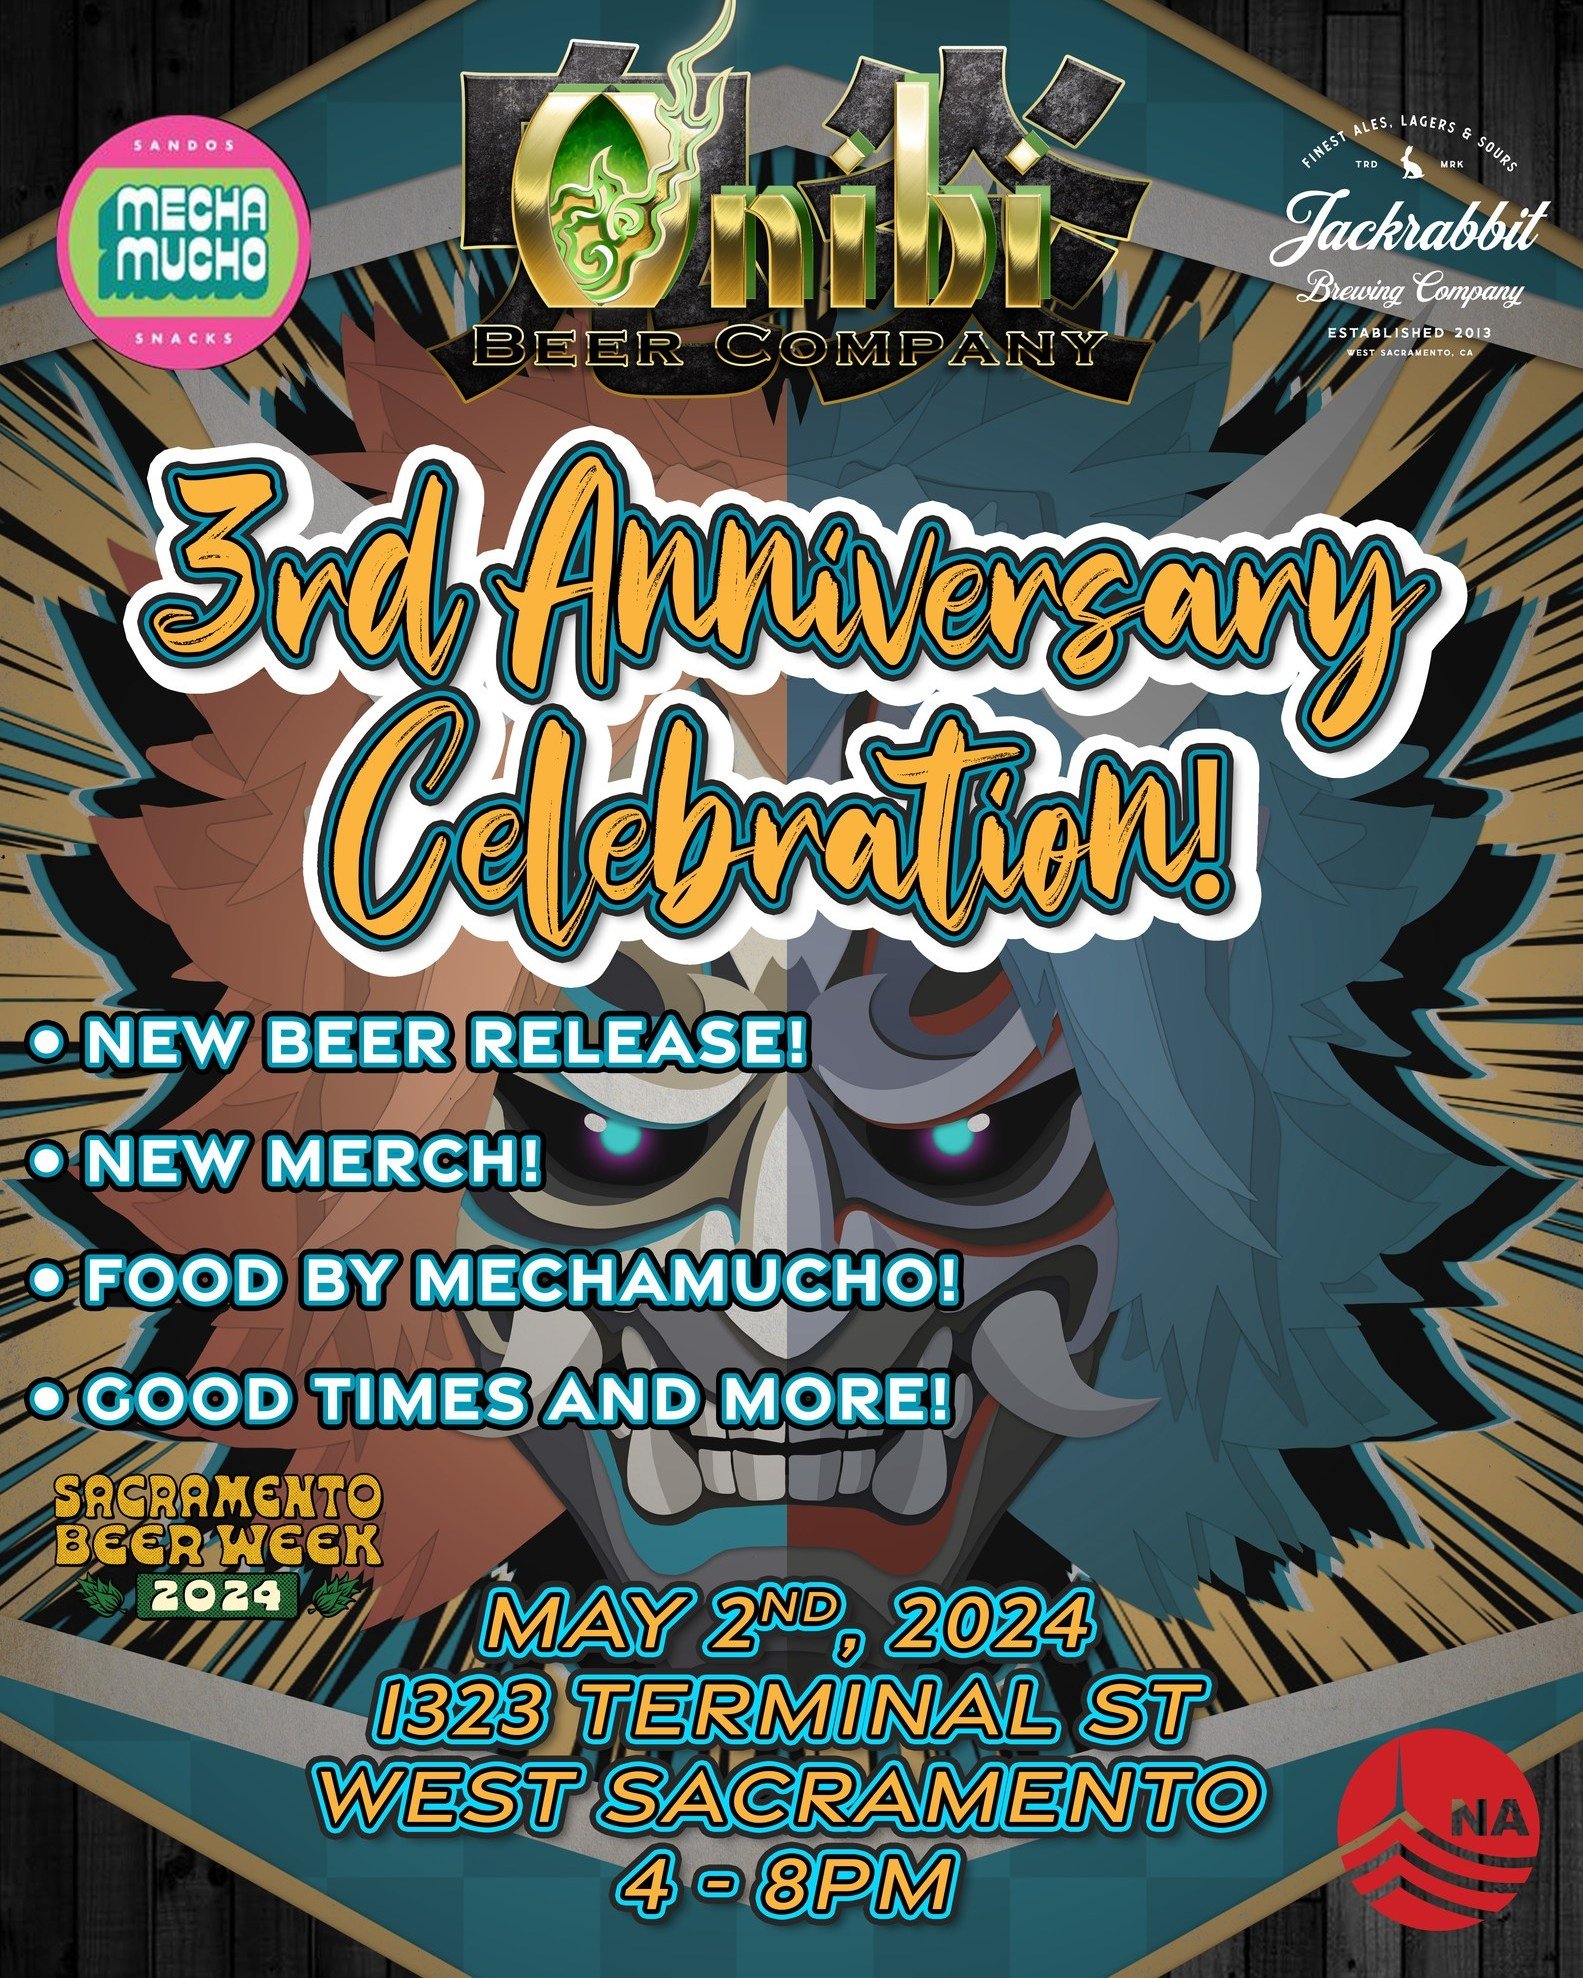 On May 2nd, come by and celebrate our 3rd anniversary with our new session IPA release, New Merch, food by @mechamucho, brewhouse tours, good times and more!  Starting at 4pm!  Family &amp; dog friendly, no cover and plenty of seating!  Hope to see e